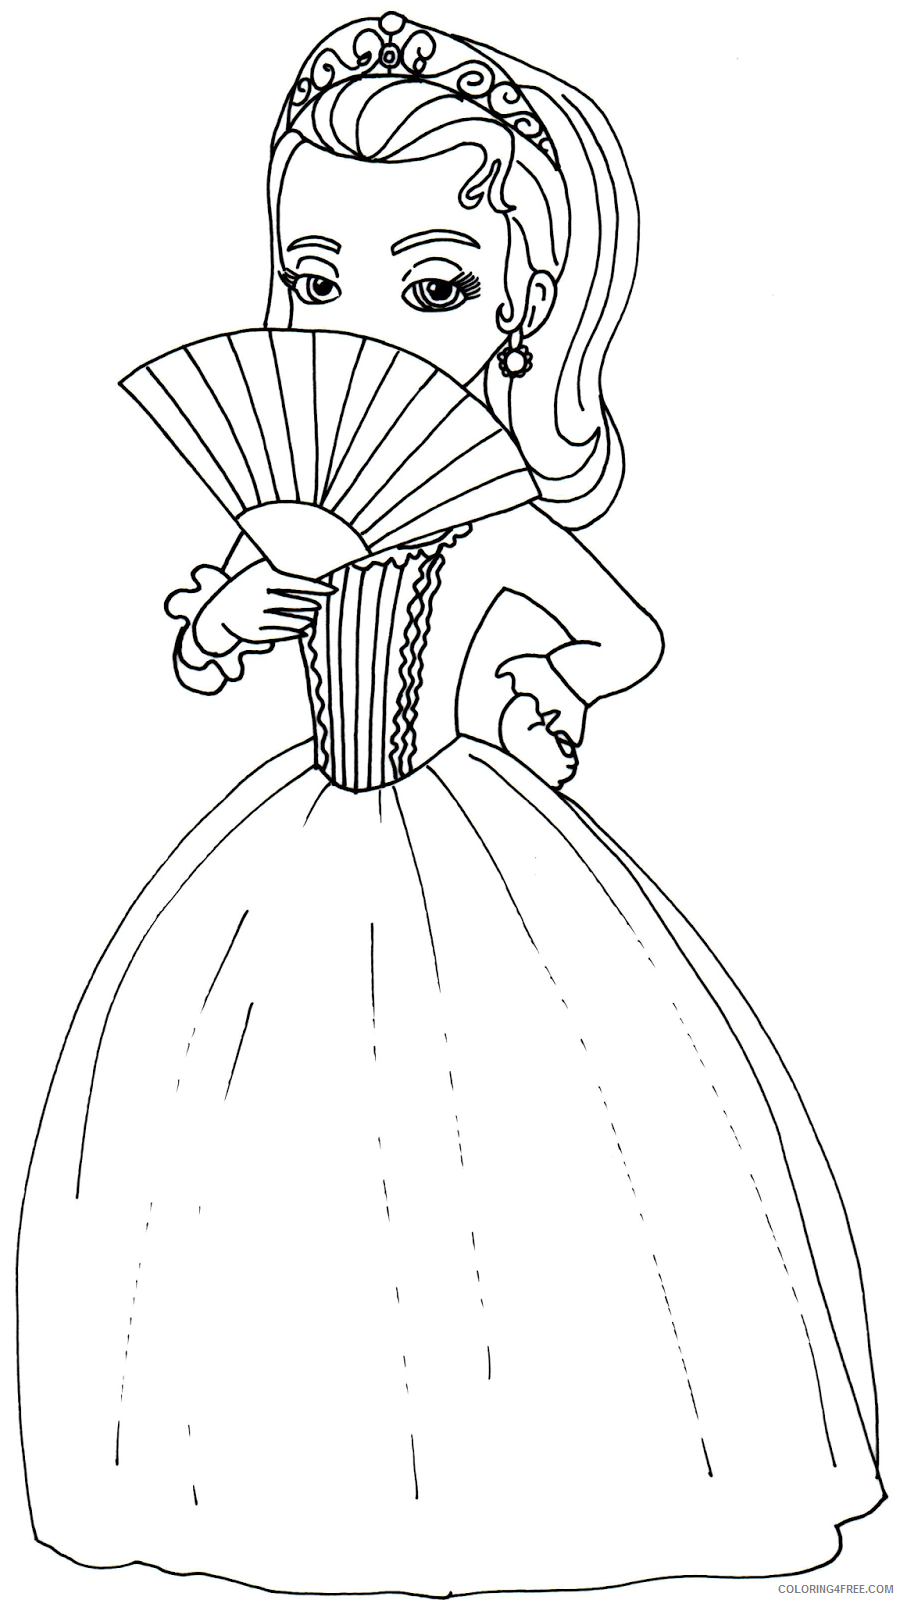 sofia the first coloring pages princess amber Coloring4free